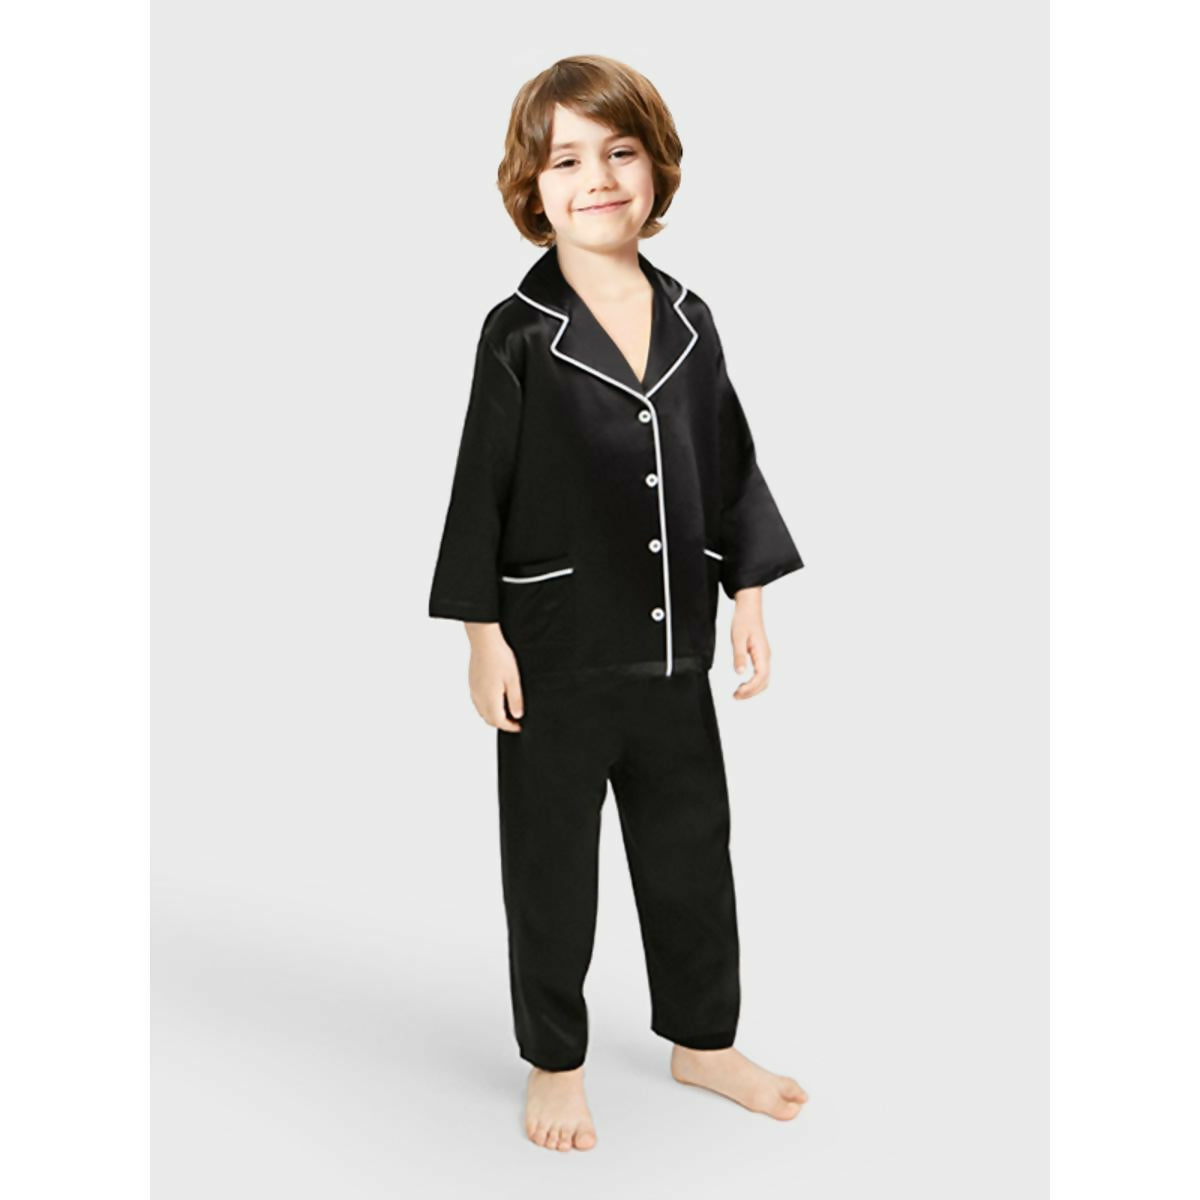 Silk Night Suit for Kids Shirt and Trouser